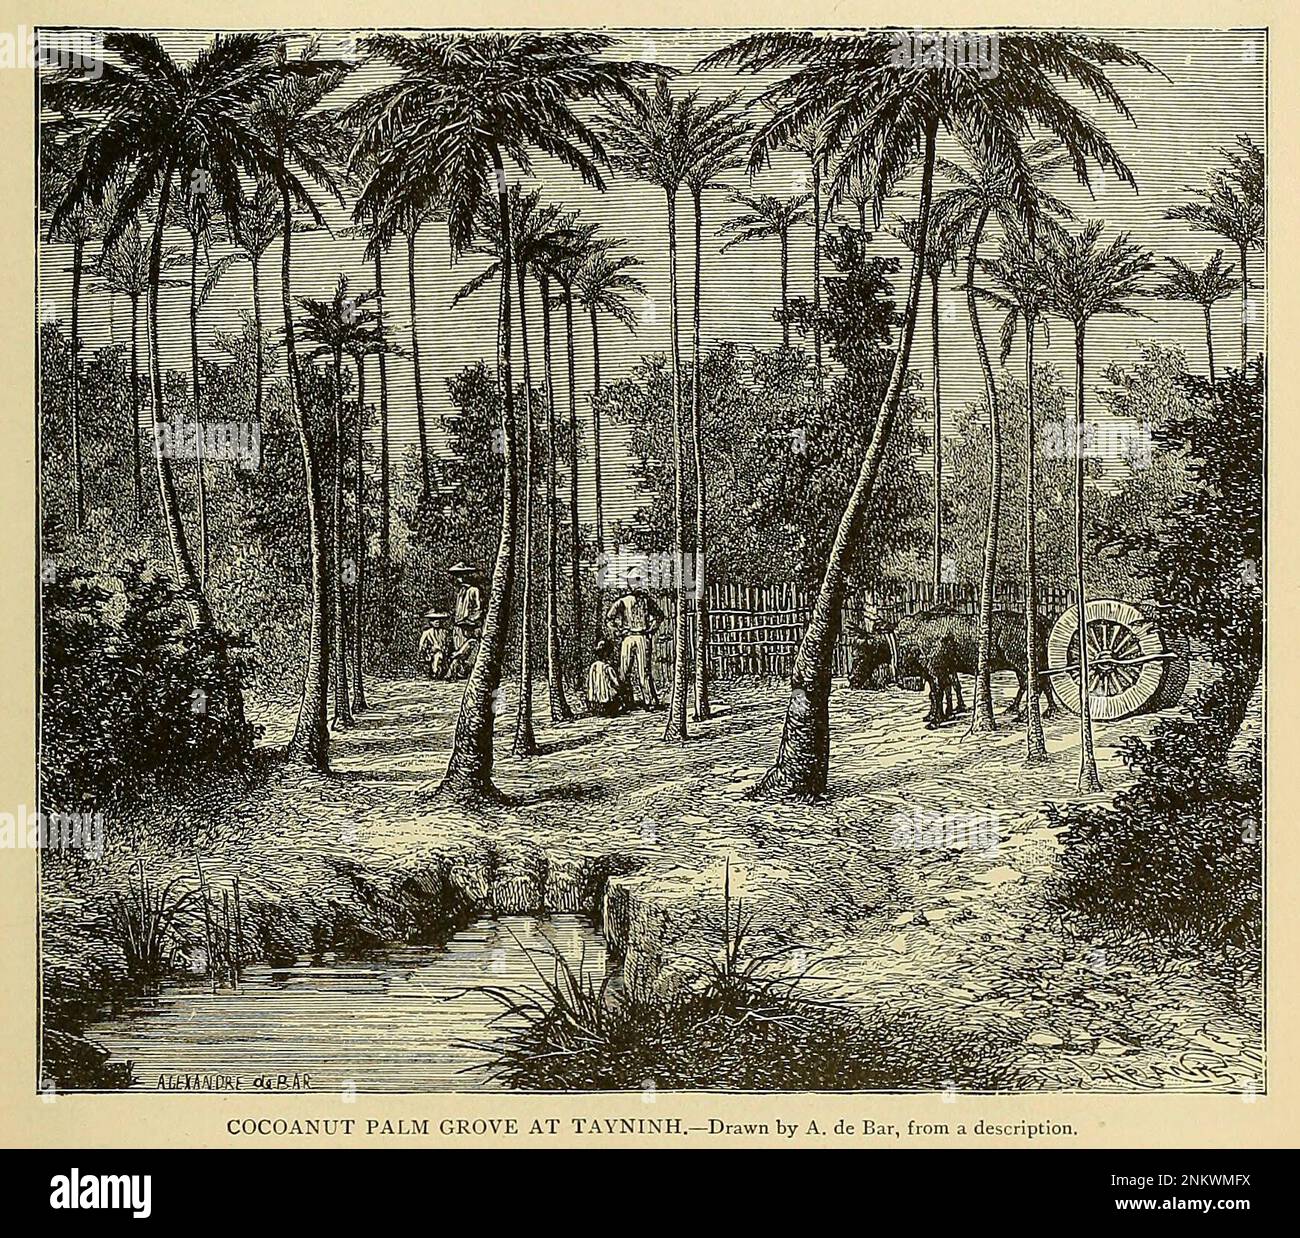 COCOANUT PALM GROVE AT TAYNINH The Brown Races Malayo-Mongoloids from Cyclopedia universal history : embracing the most complete and recent presentation of the subject in two principal parts or divisions of more than six thousand pages by John Clark Ridpath, 1840-1900 Publication date 1895 Publisher Boston : Balch Bros. Volume 6 History of Man and Mankind Stock Photo